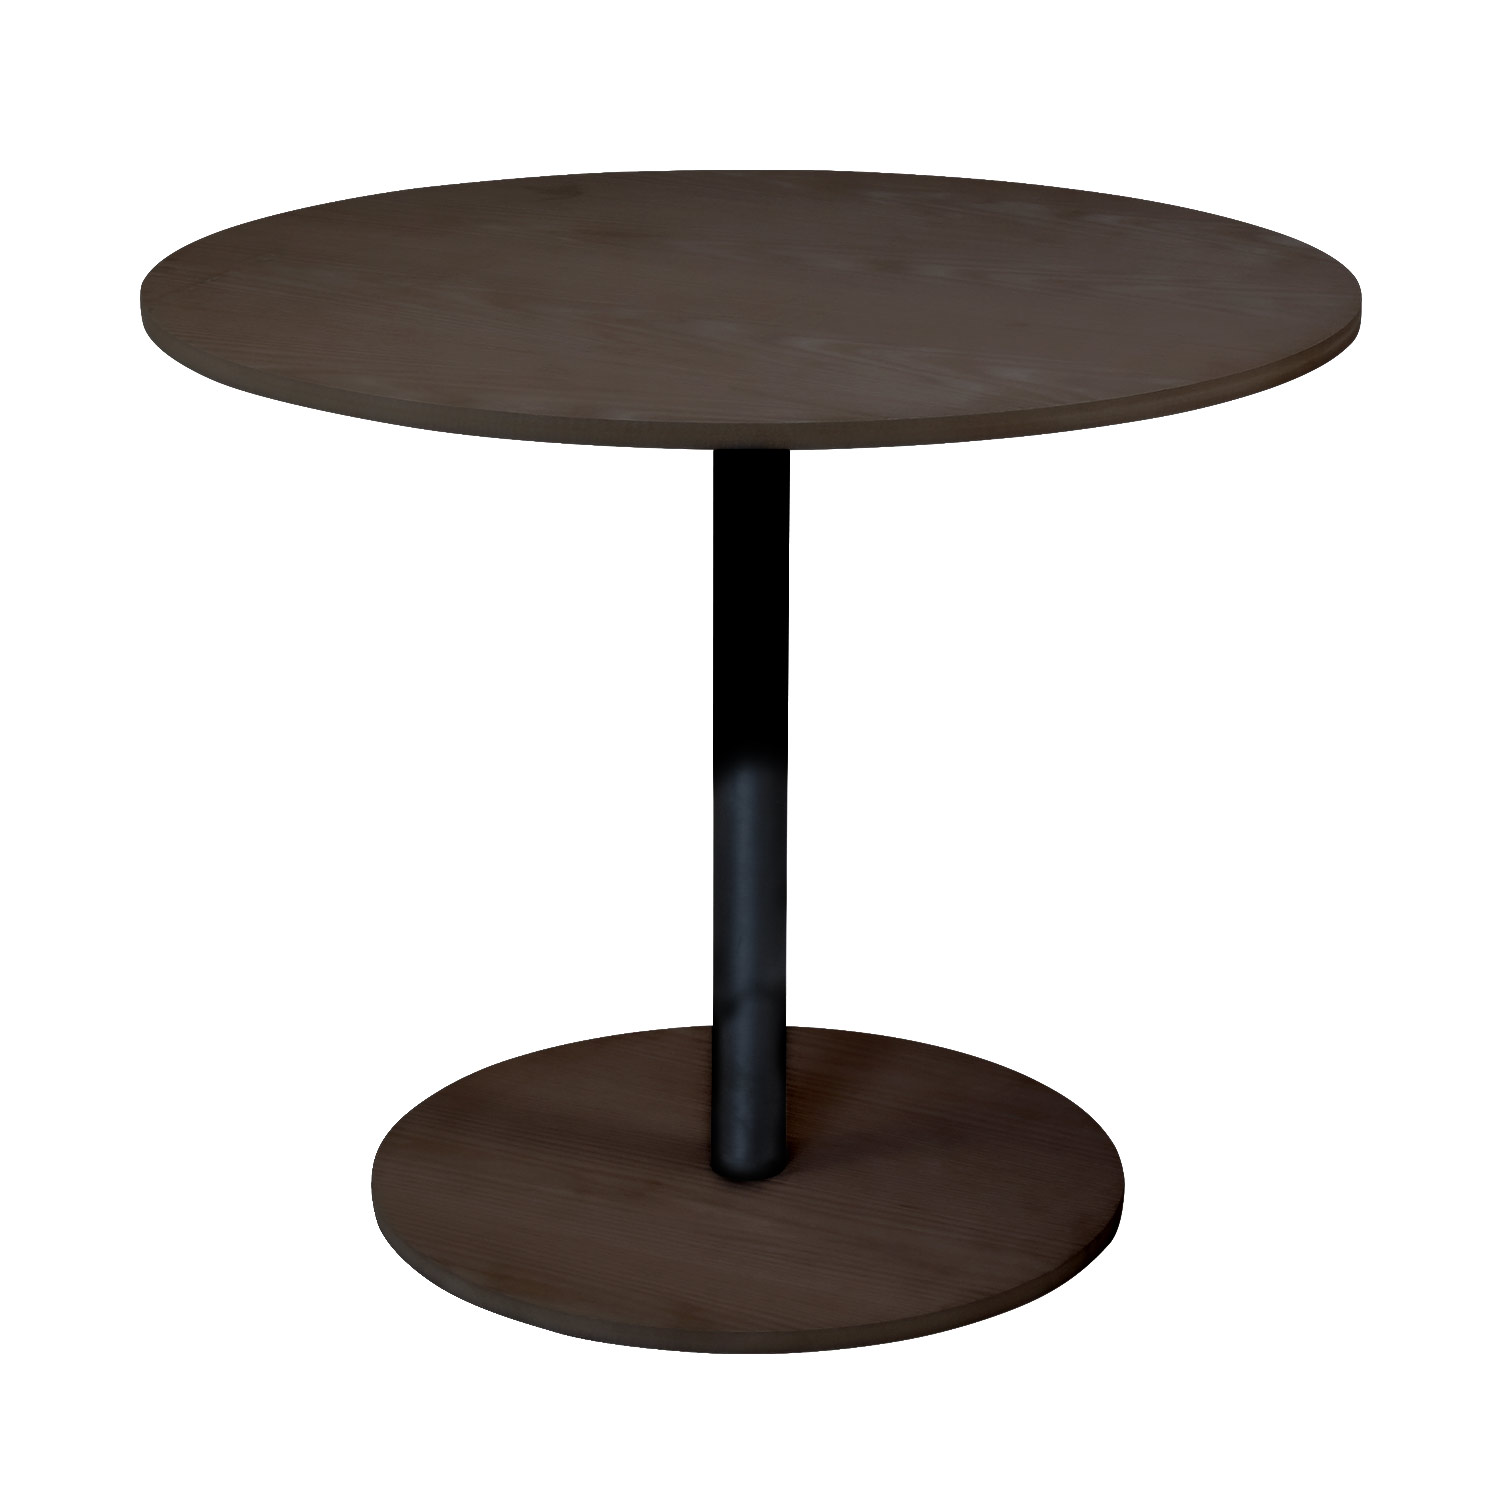 Tertre Dark Single Stand Four Seater Dining Table